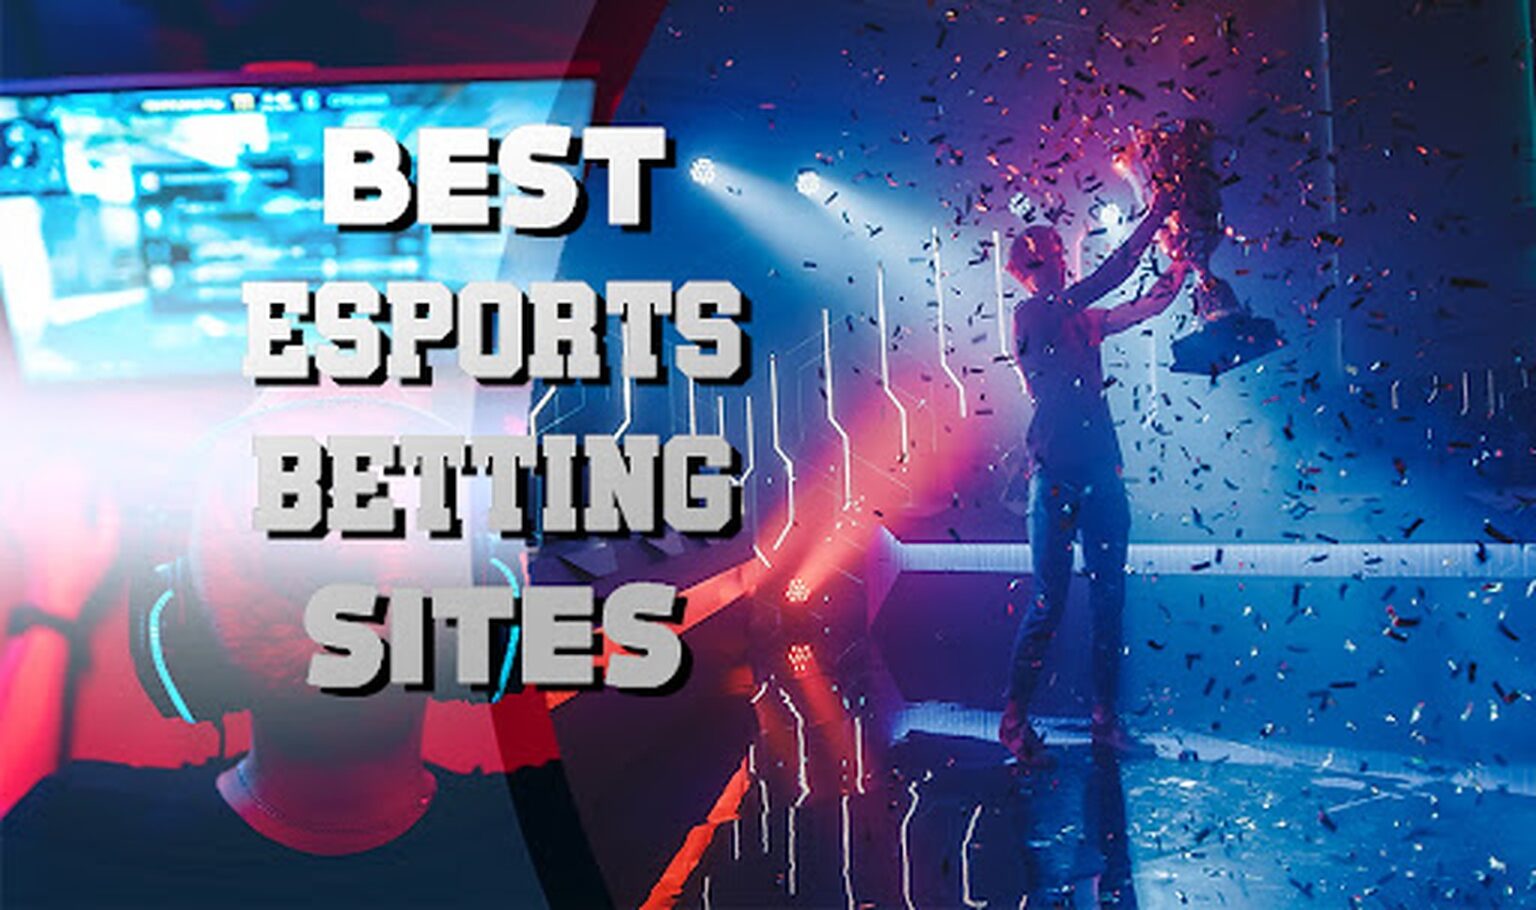 Check out the best esports betting sites ranked by experts for tournament coverage, types of bets, live betting and streaming, and odds.